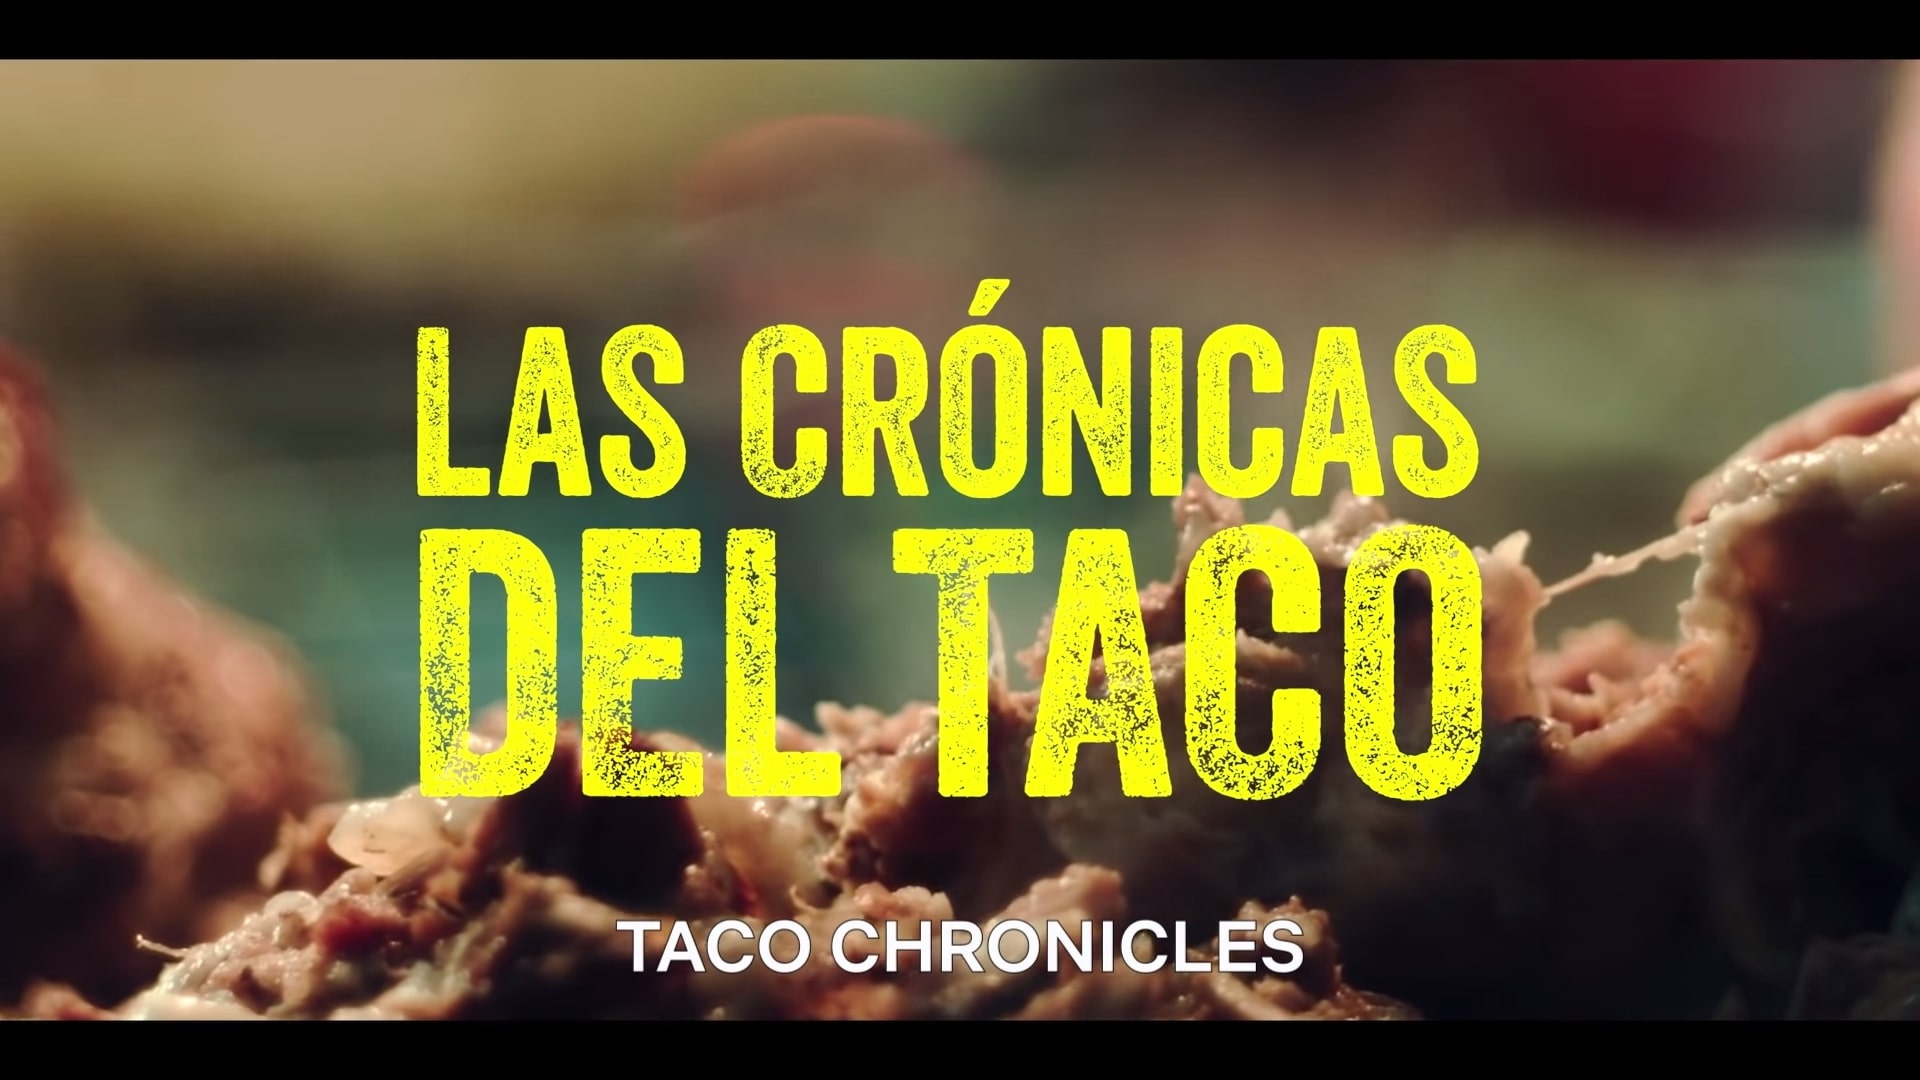 Netflix The Taco Chronicles Season 2 Trailer, Netflix Food Shows, Netflix Reality Shows, Coming to Netflix in September 2020